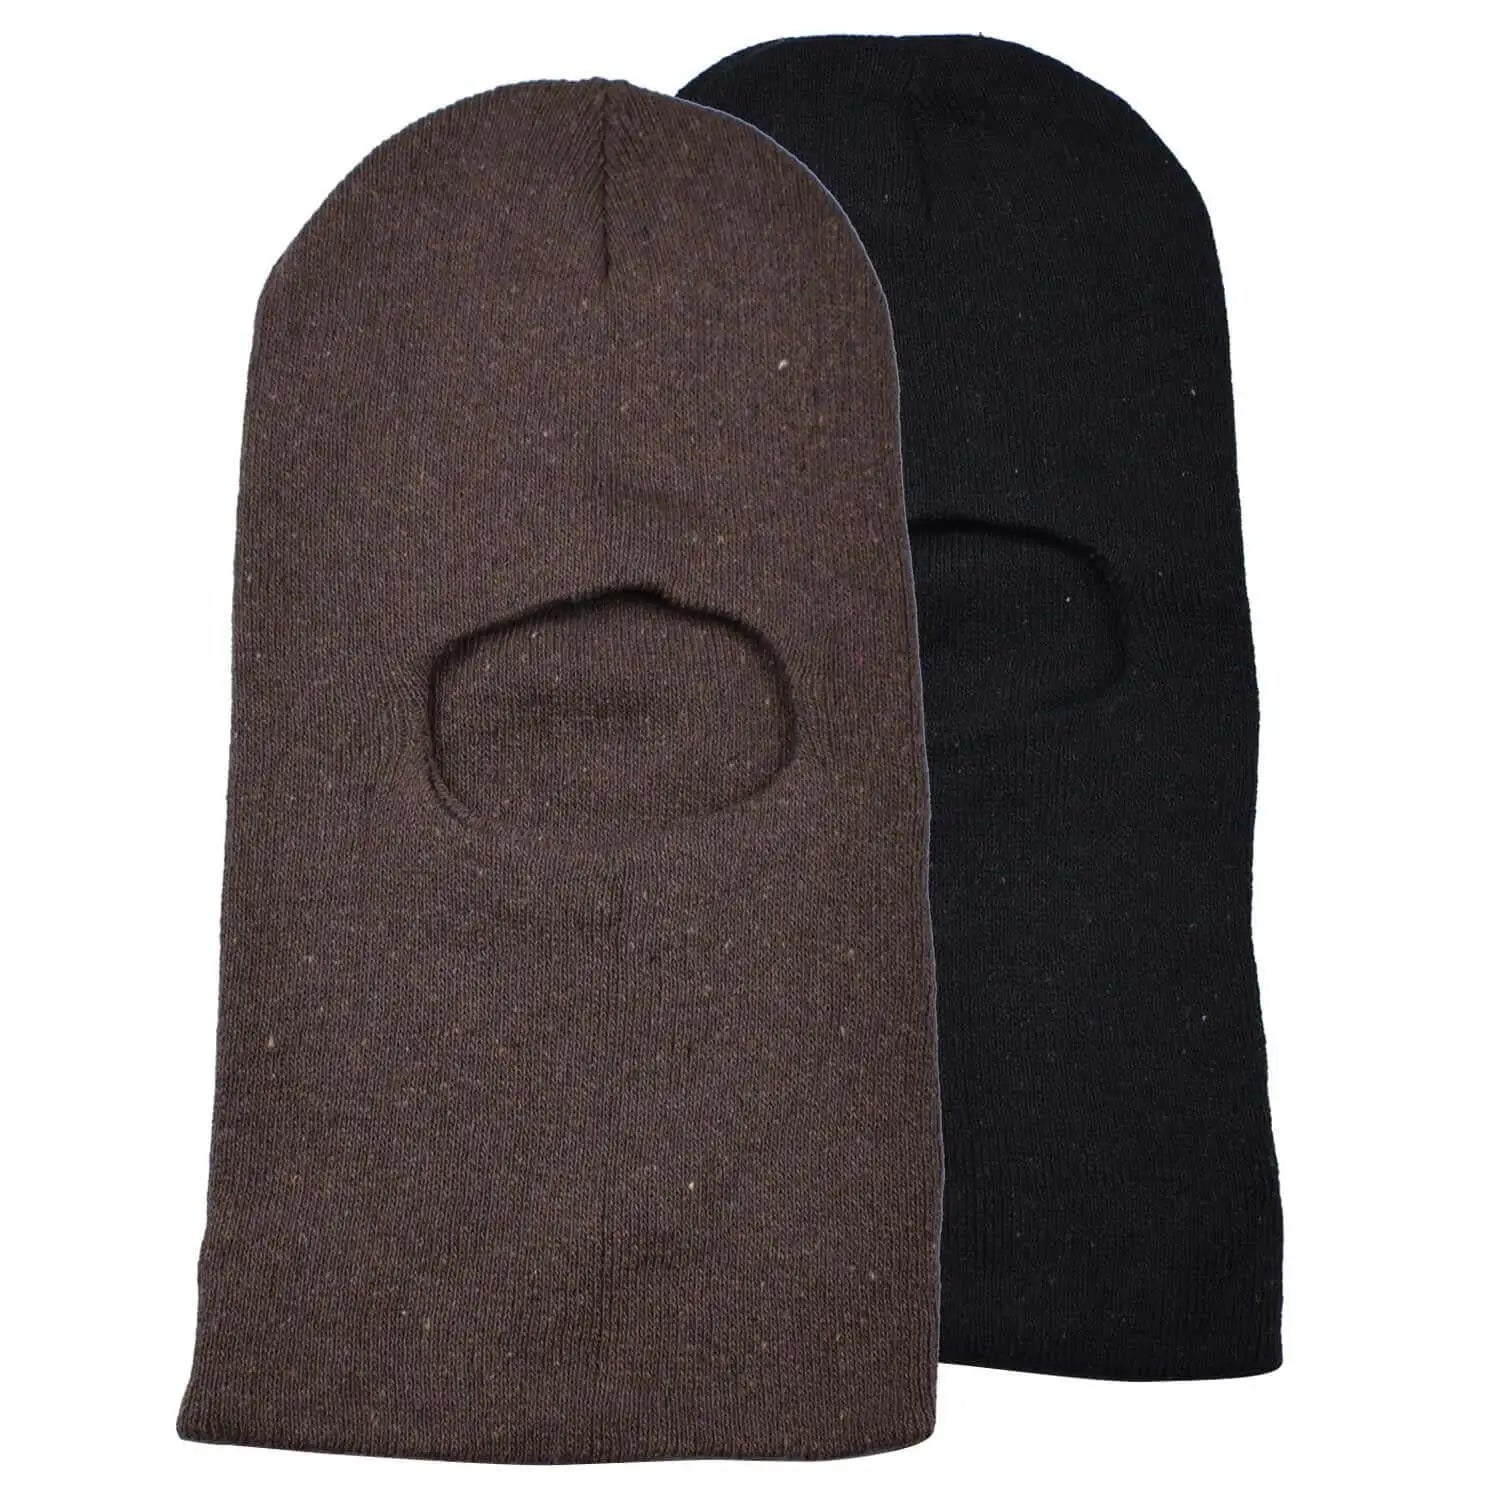 Multifunctional cotton blend black and brown beanies displayed in product named ’Multifunctional Cotton Blend Balaclava Face Cover Hat’.